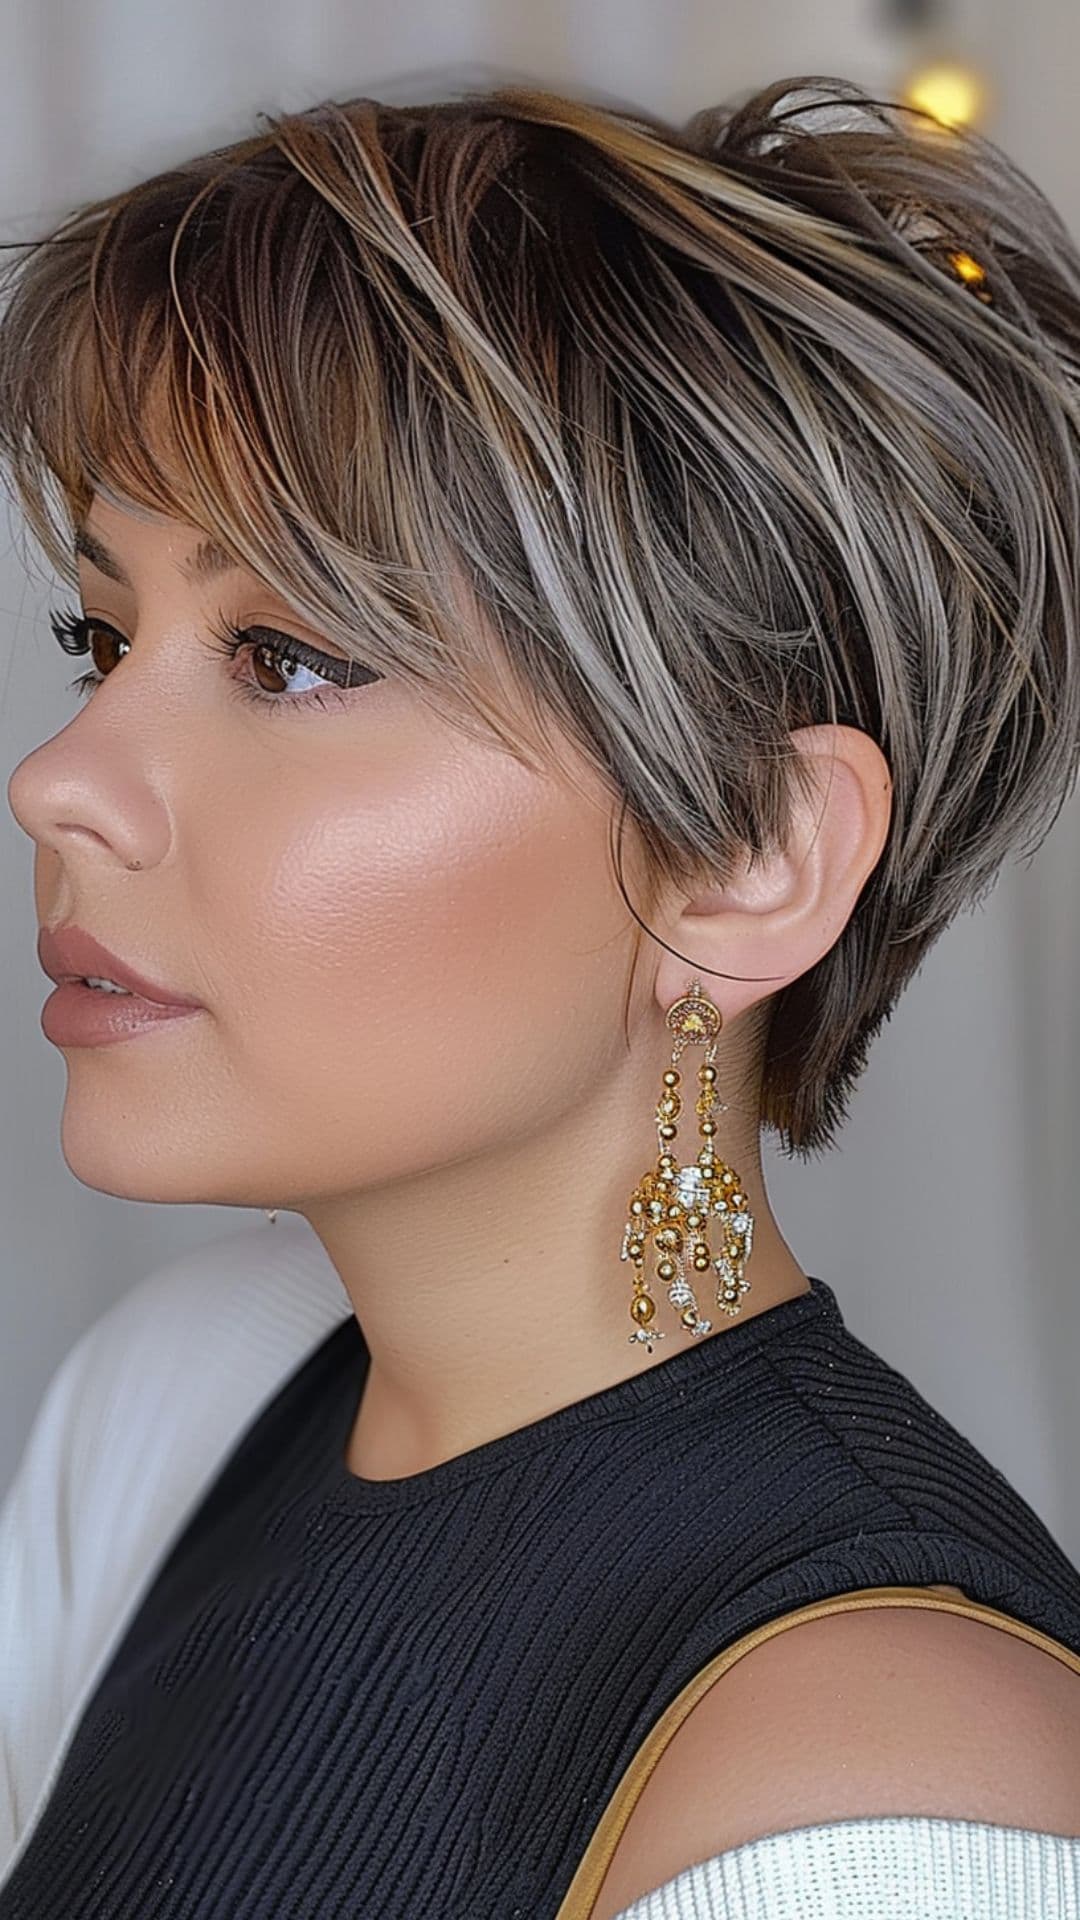 A woman modelling a pixie cut with choppy textured layers.